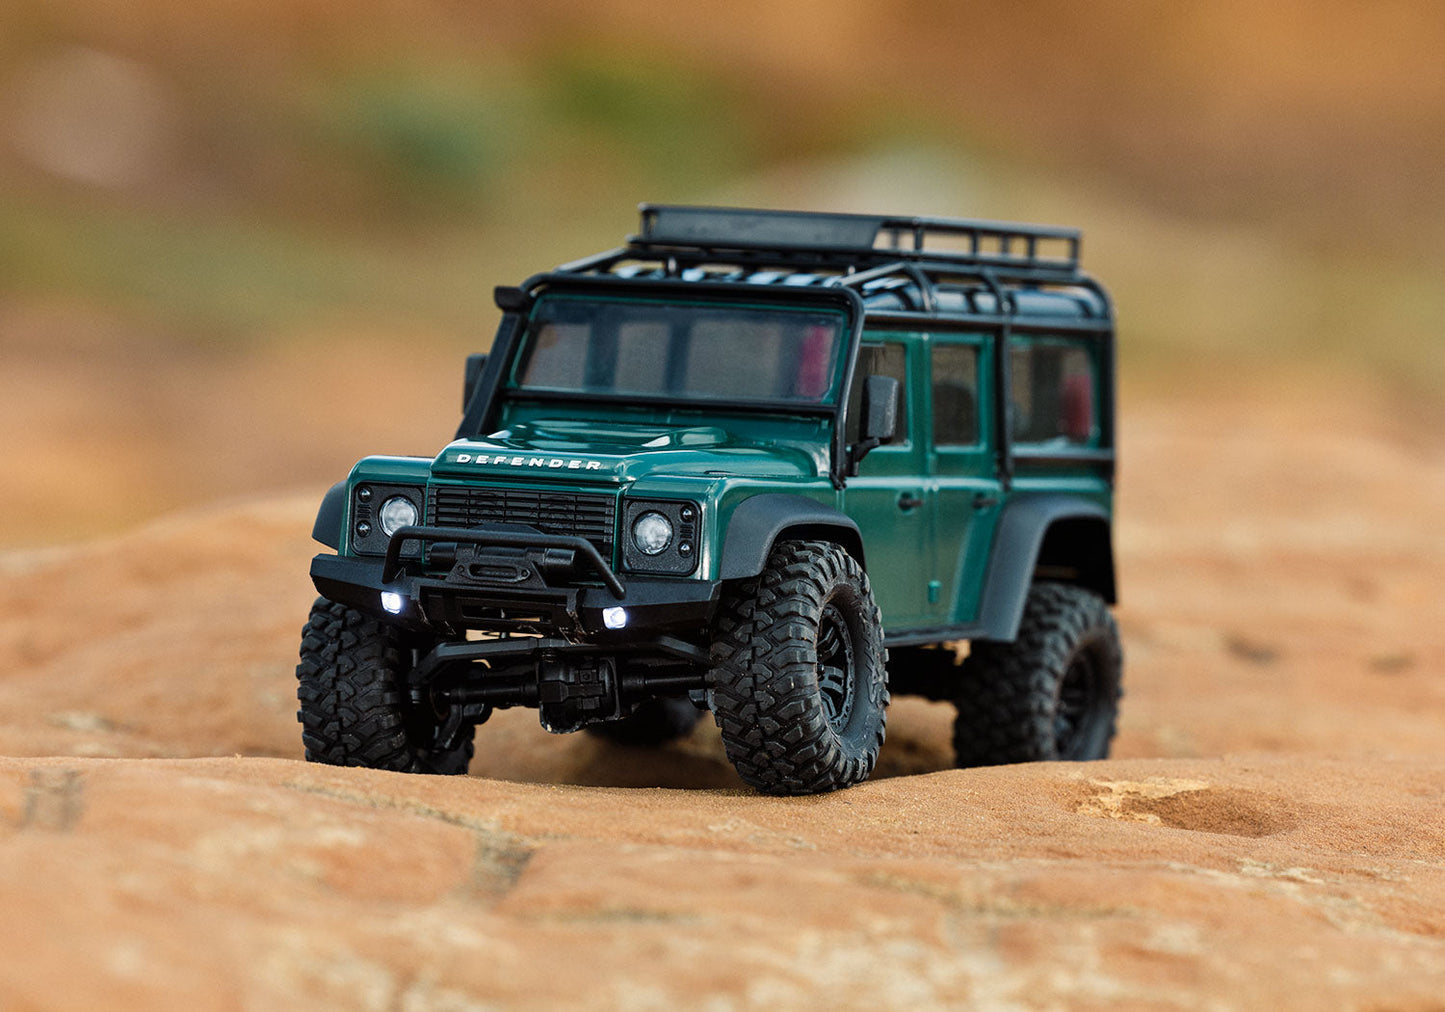 97054-1 TRX-4M Defender 1/18th Scale Crawler Red